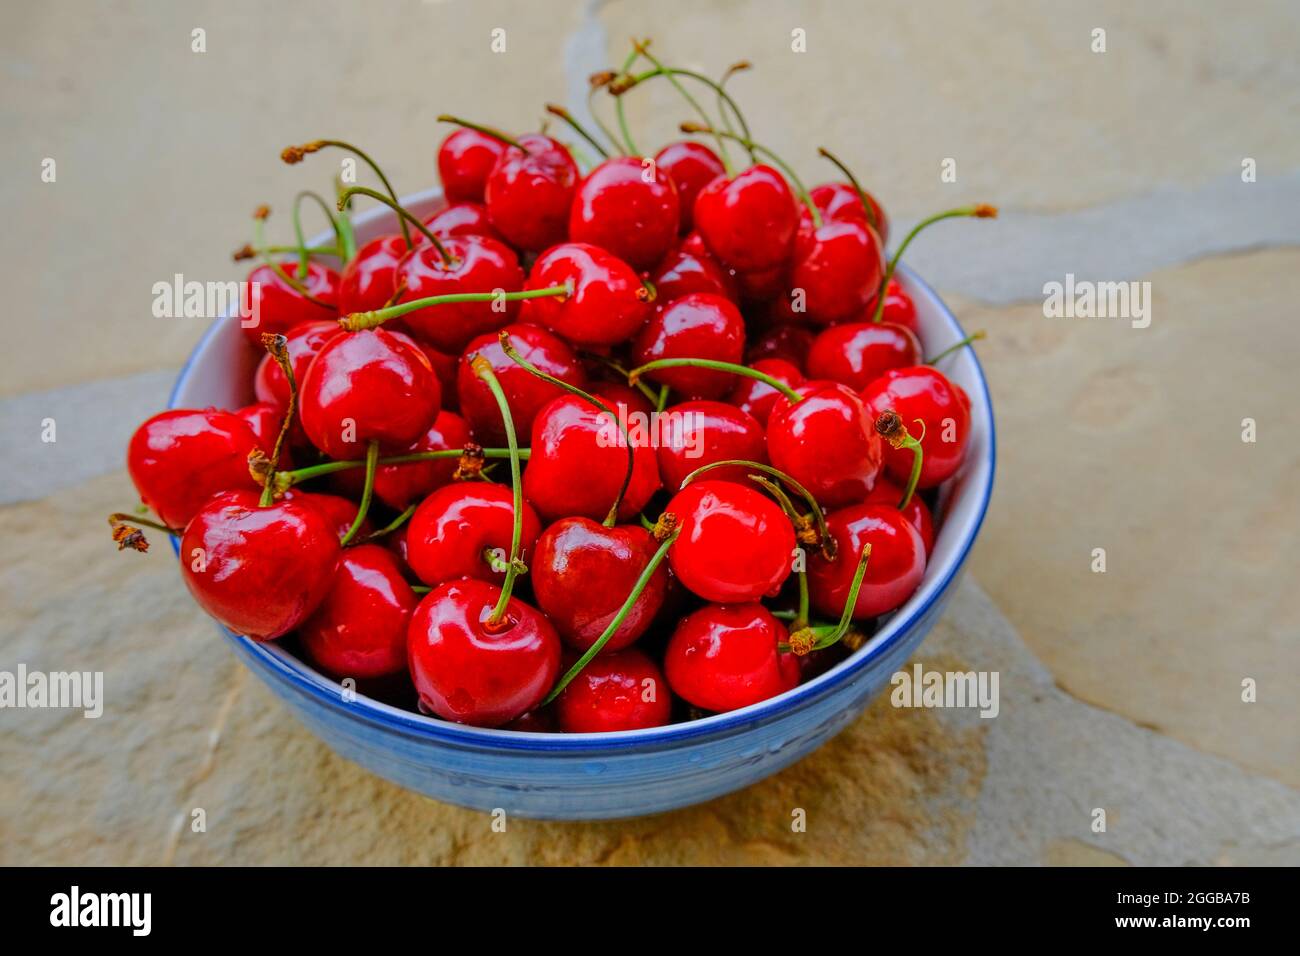 ripe raw big cherries close-up in a bowl on a stone background. Summer fruits. healthy lifestyle Stock Photo